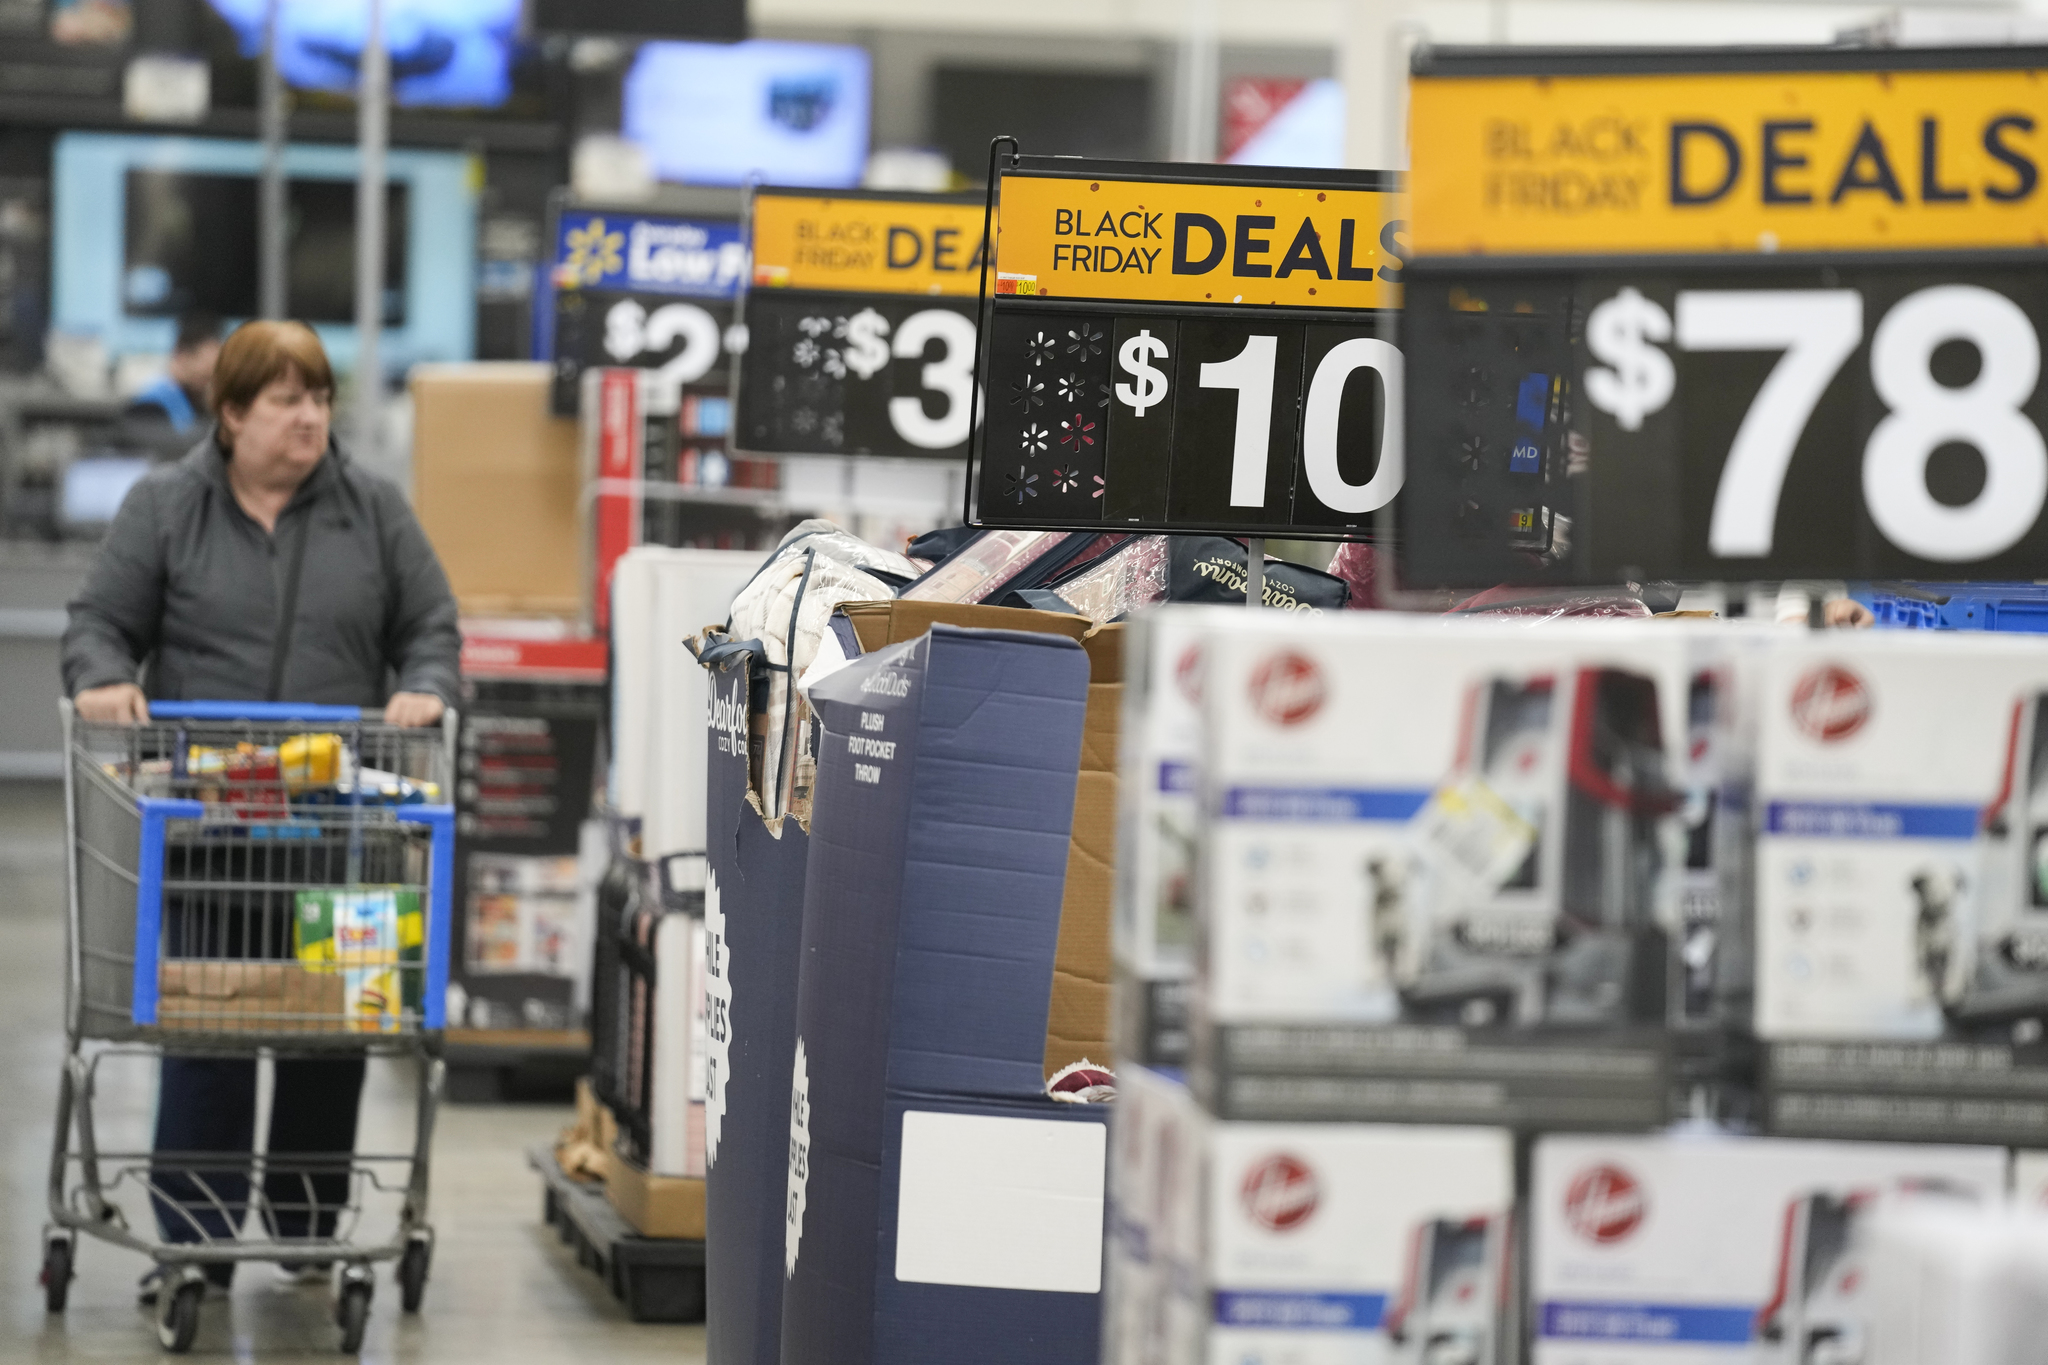 Walmart Black Friday Deals: What are the best discounts you'll find today?